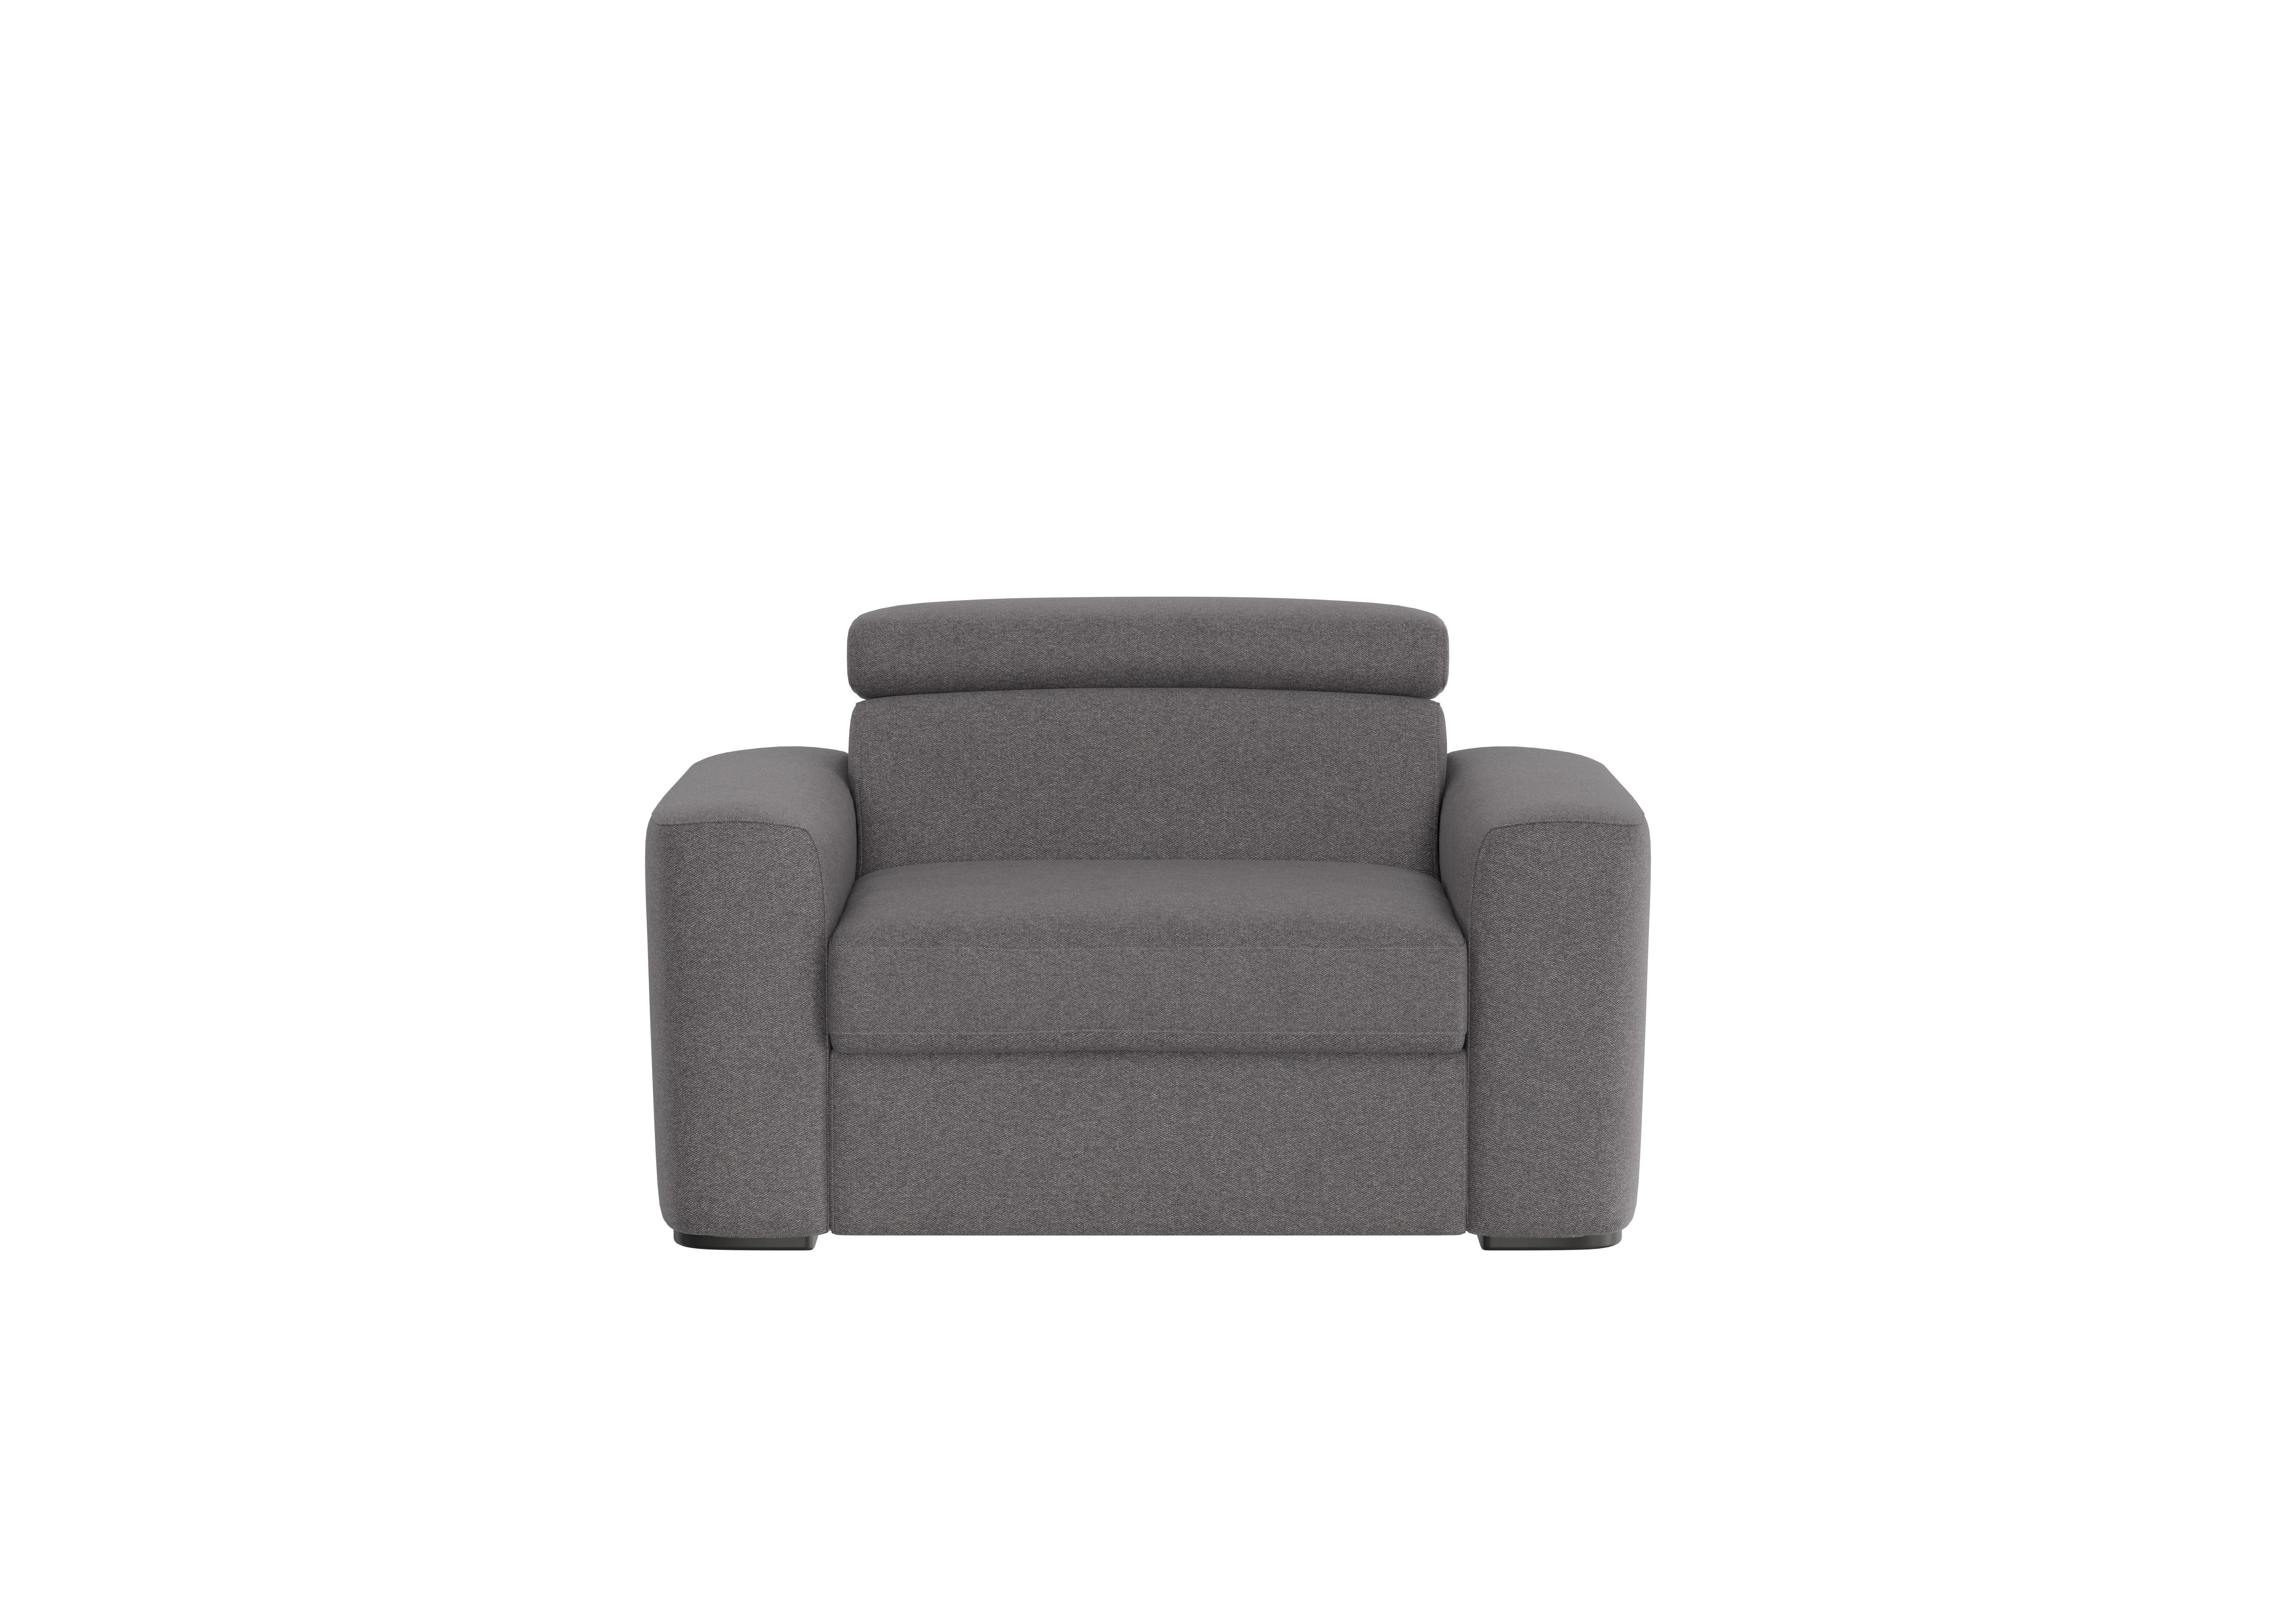 Infinity Fabric Chair Sofa Bed in Fab-Ska-R31 Charcoal Gray on Furniture Village